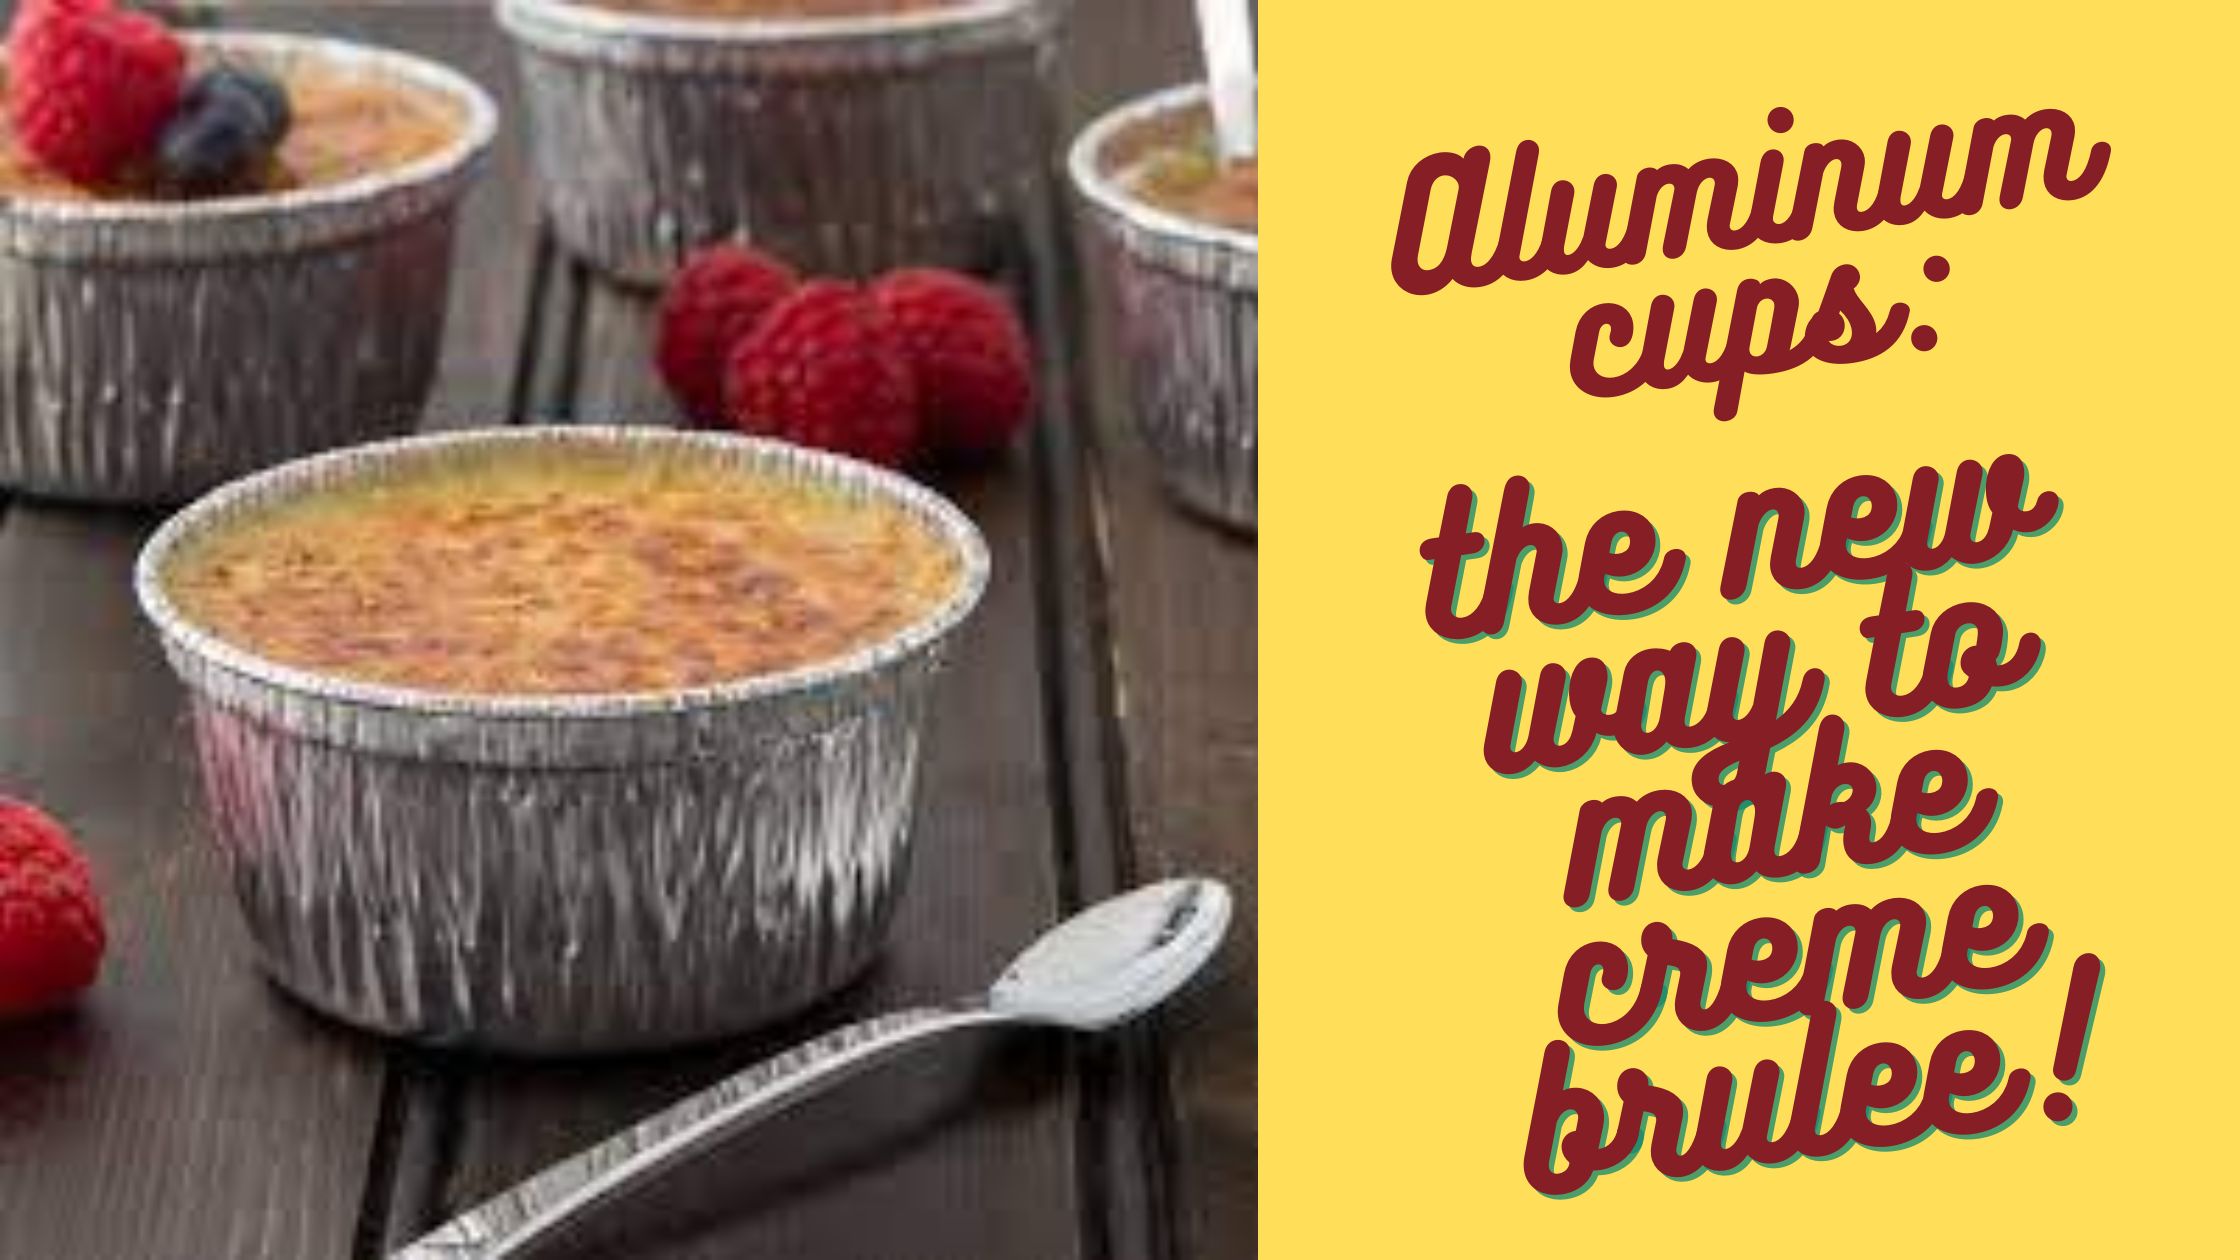 Can you make creme brulee in aluminum cups